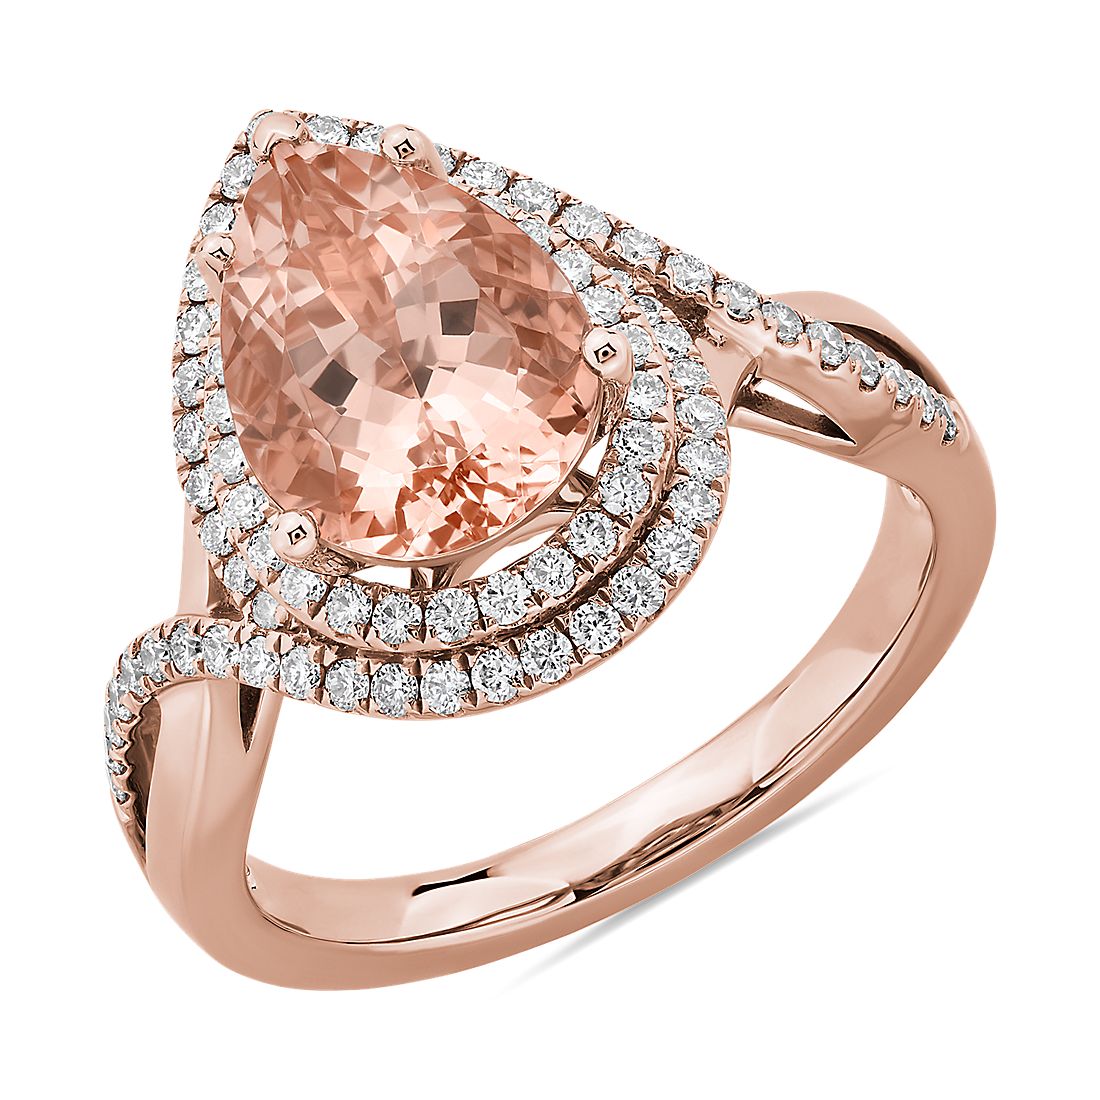 Details about   2Ct Pear Cut Morganite Diamond Flawless Halo Engagement Ring 14K Rose Gold Over